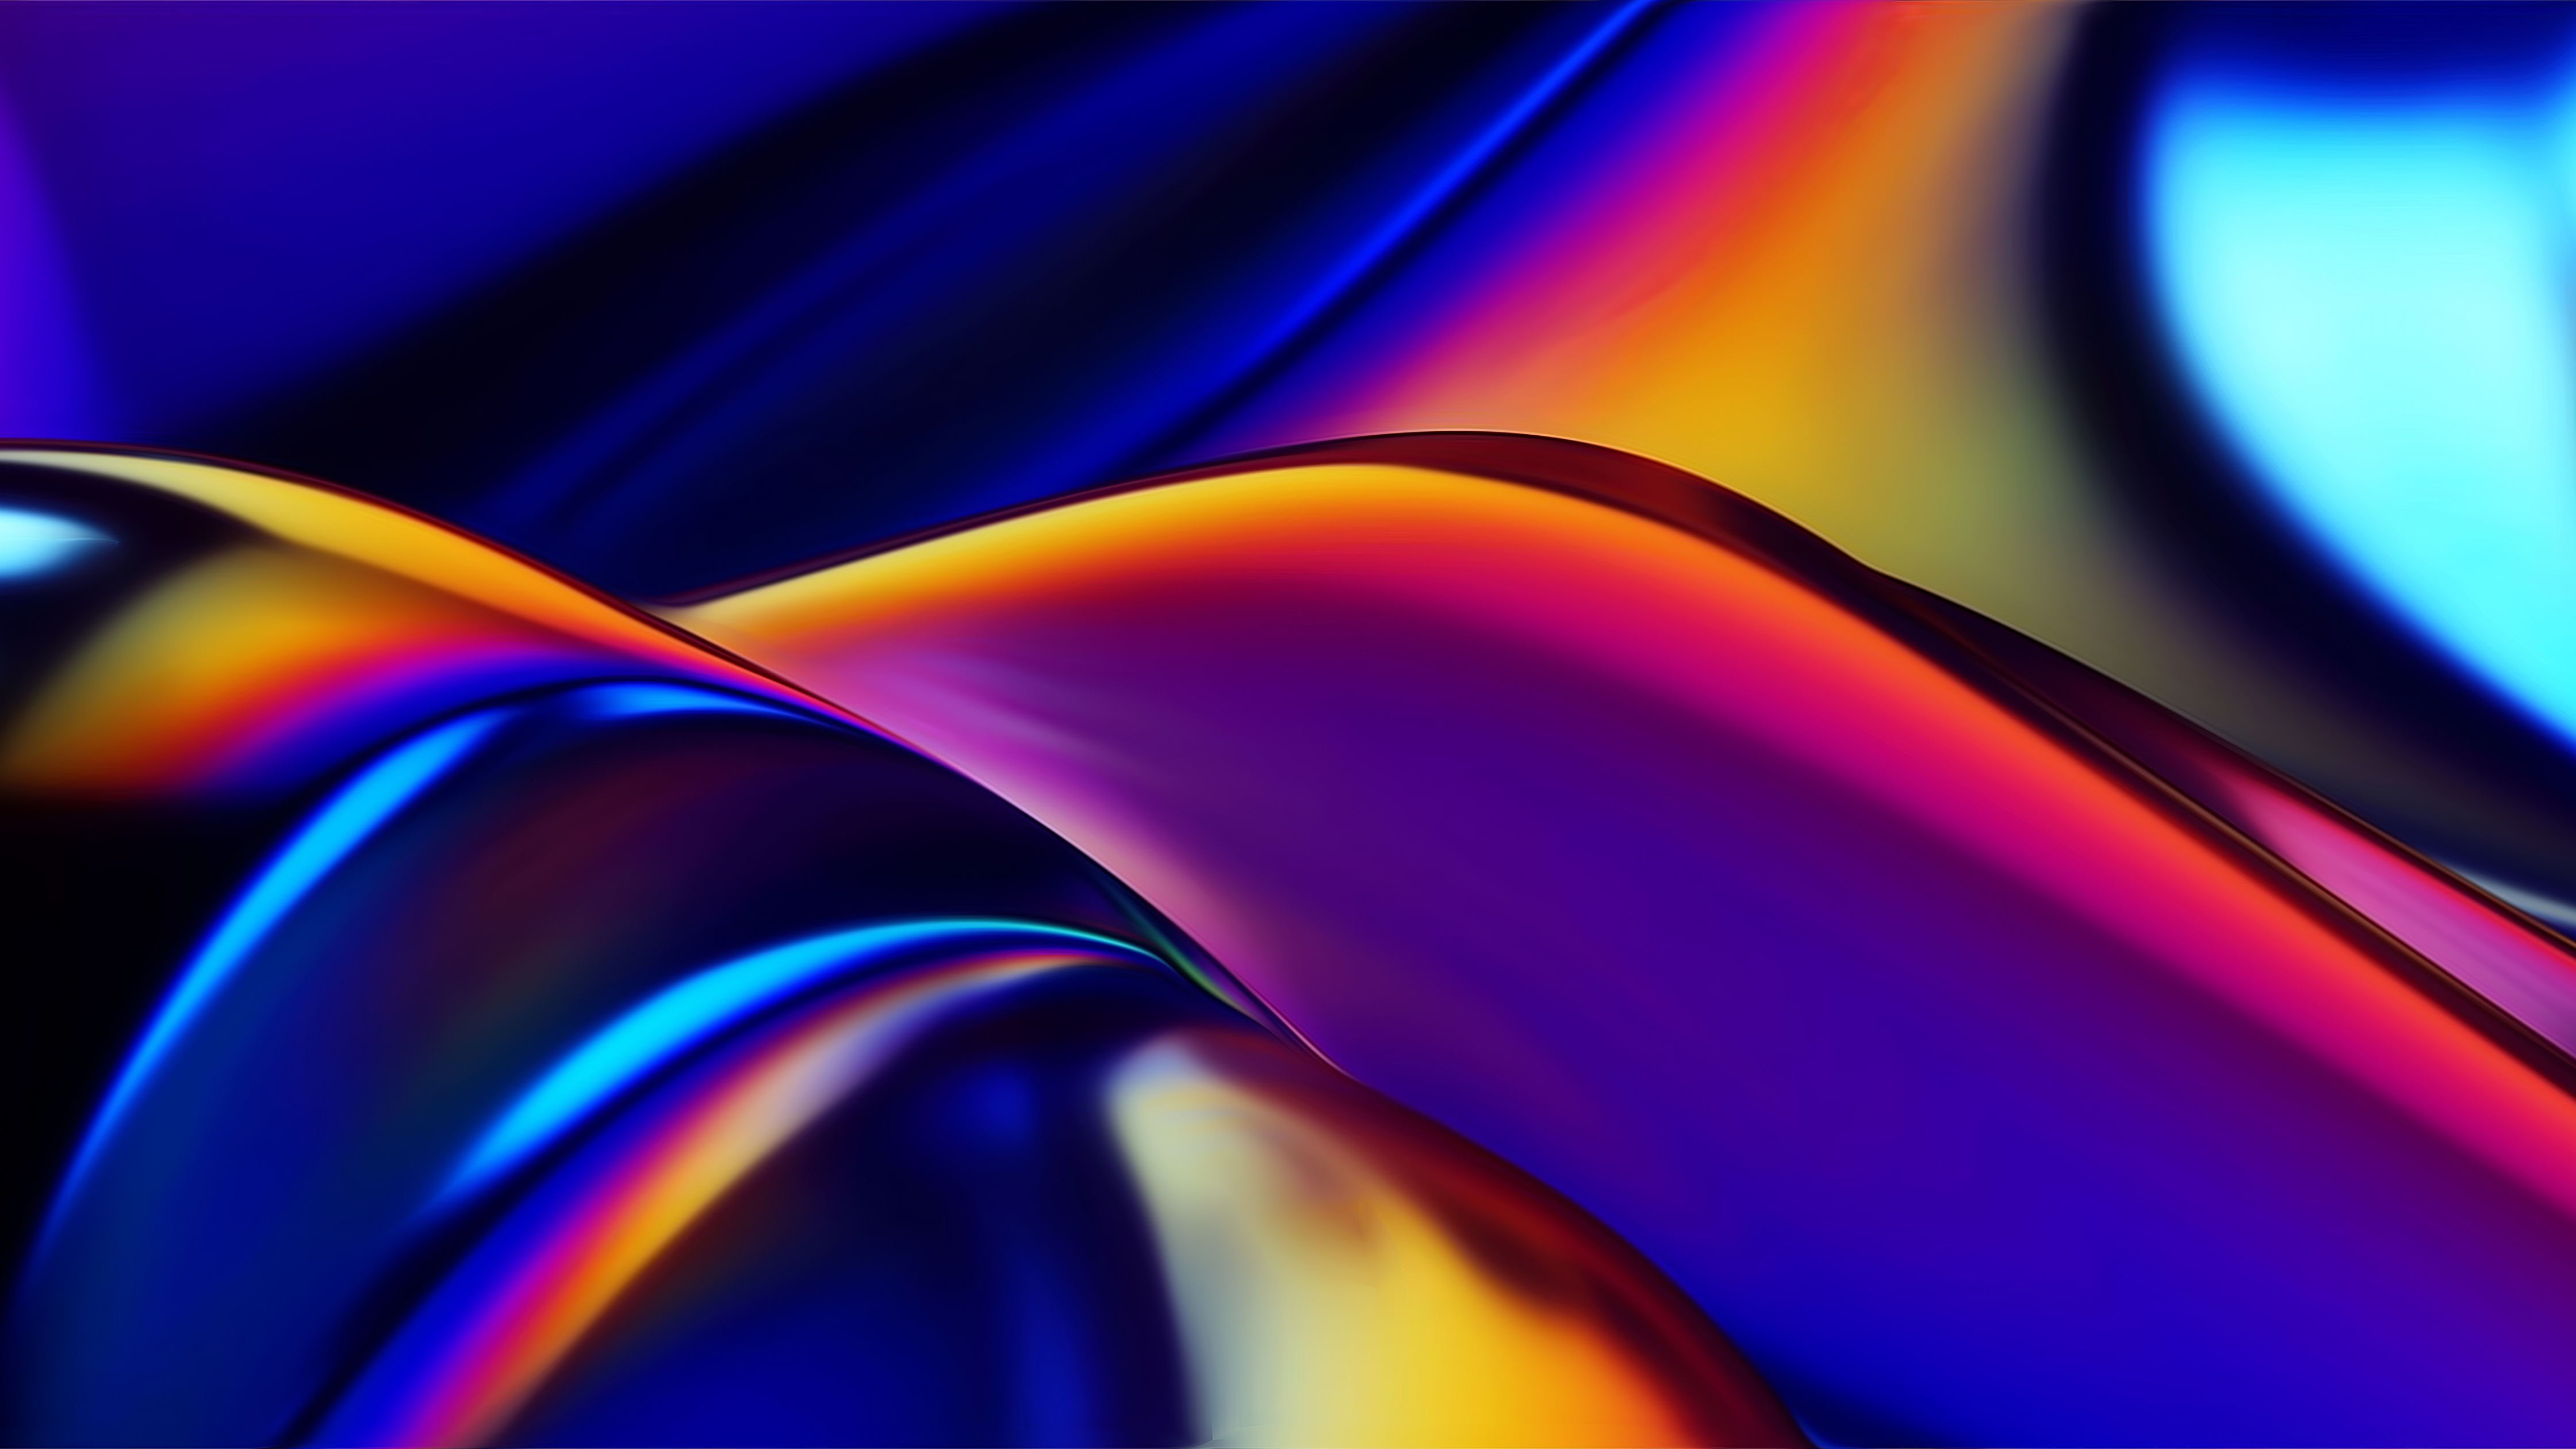 Apple Pro Display XDR Wallpaper 4K, Colorful, Stock, 5K, Abstract, #283